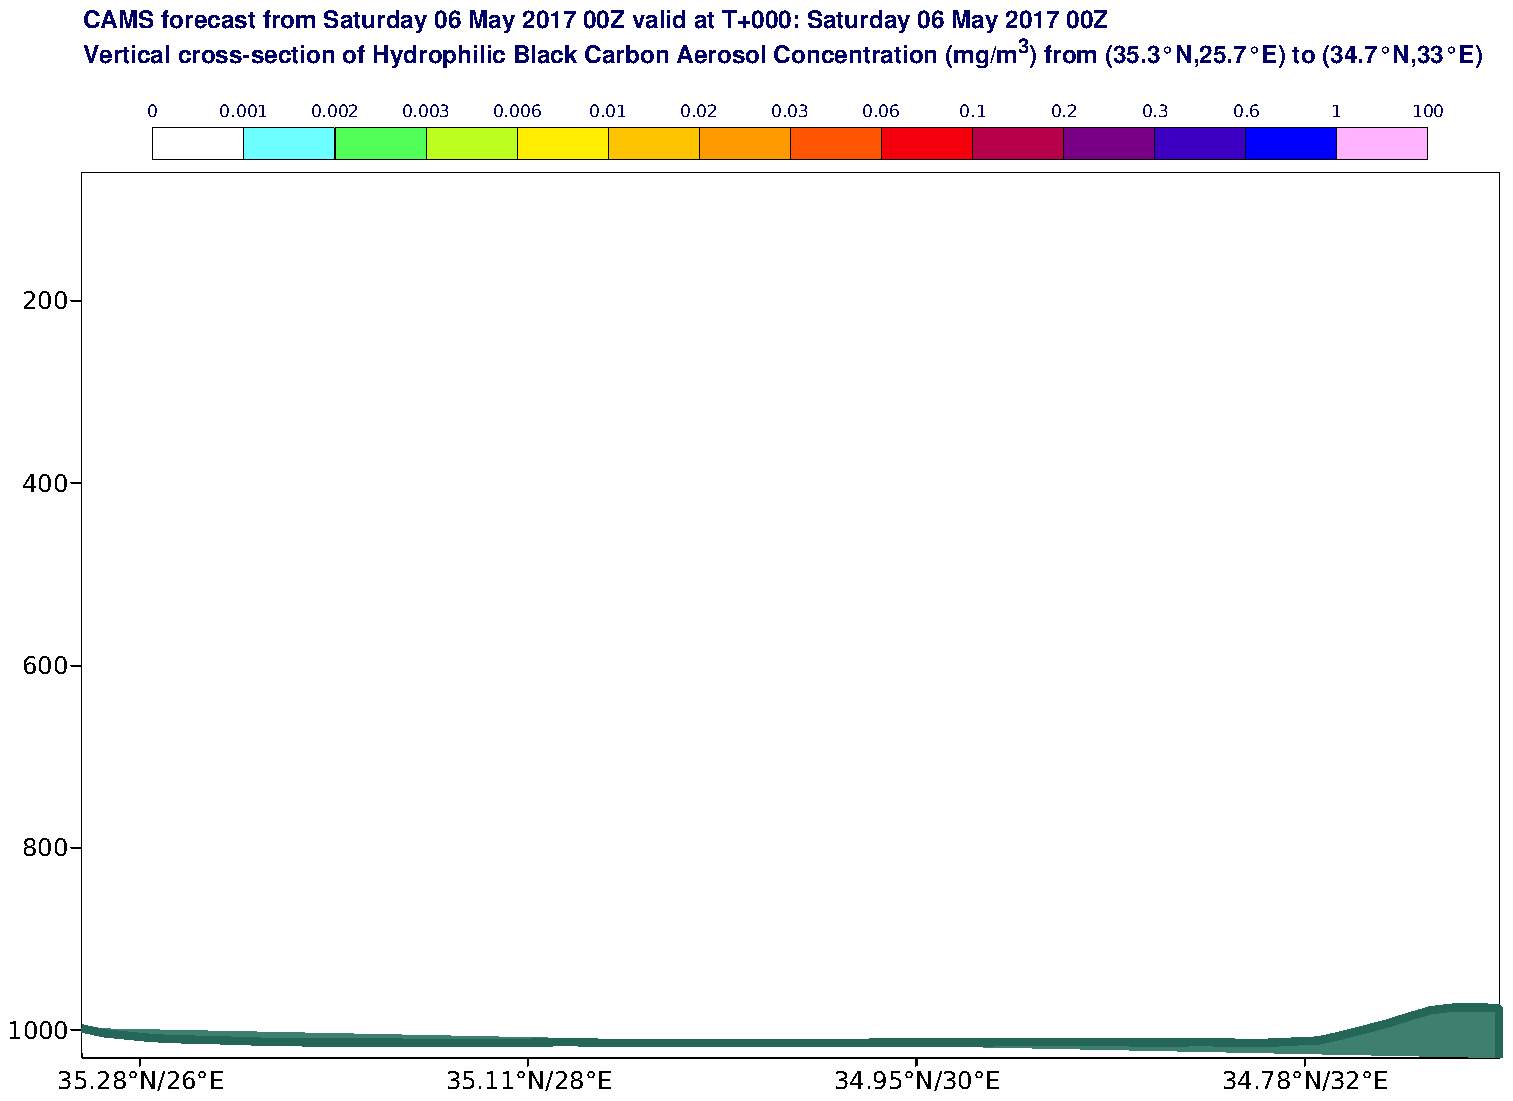 Vertical cross-section of Hydrophilic Black Carbon Aerosol Concentration (mg/m3) valid at T0 - 2017-05-06 00:00